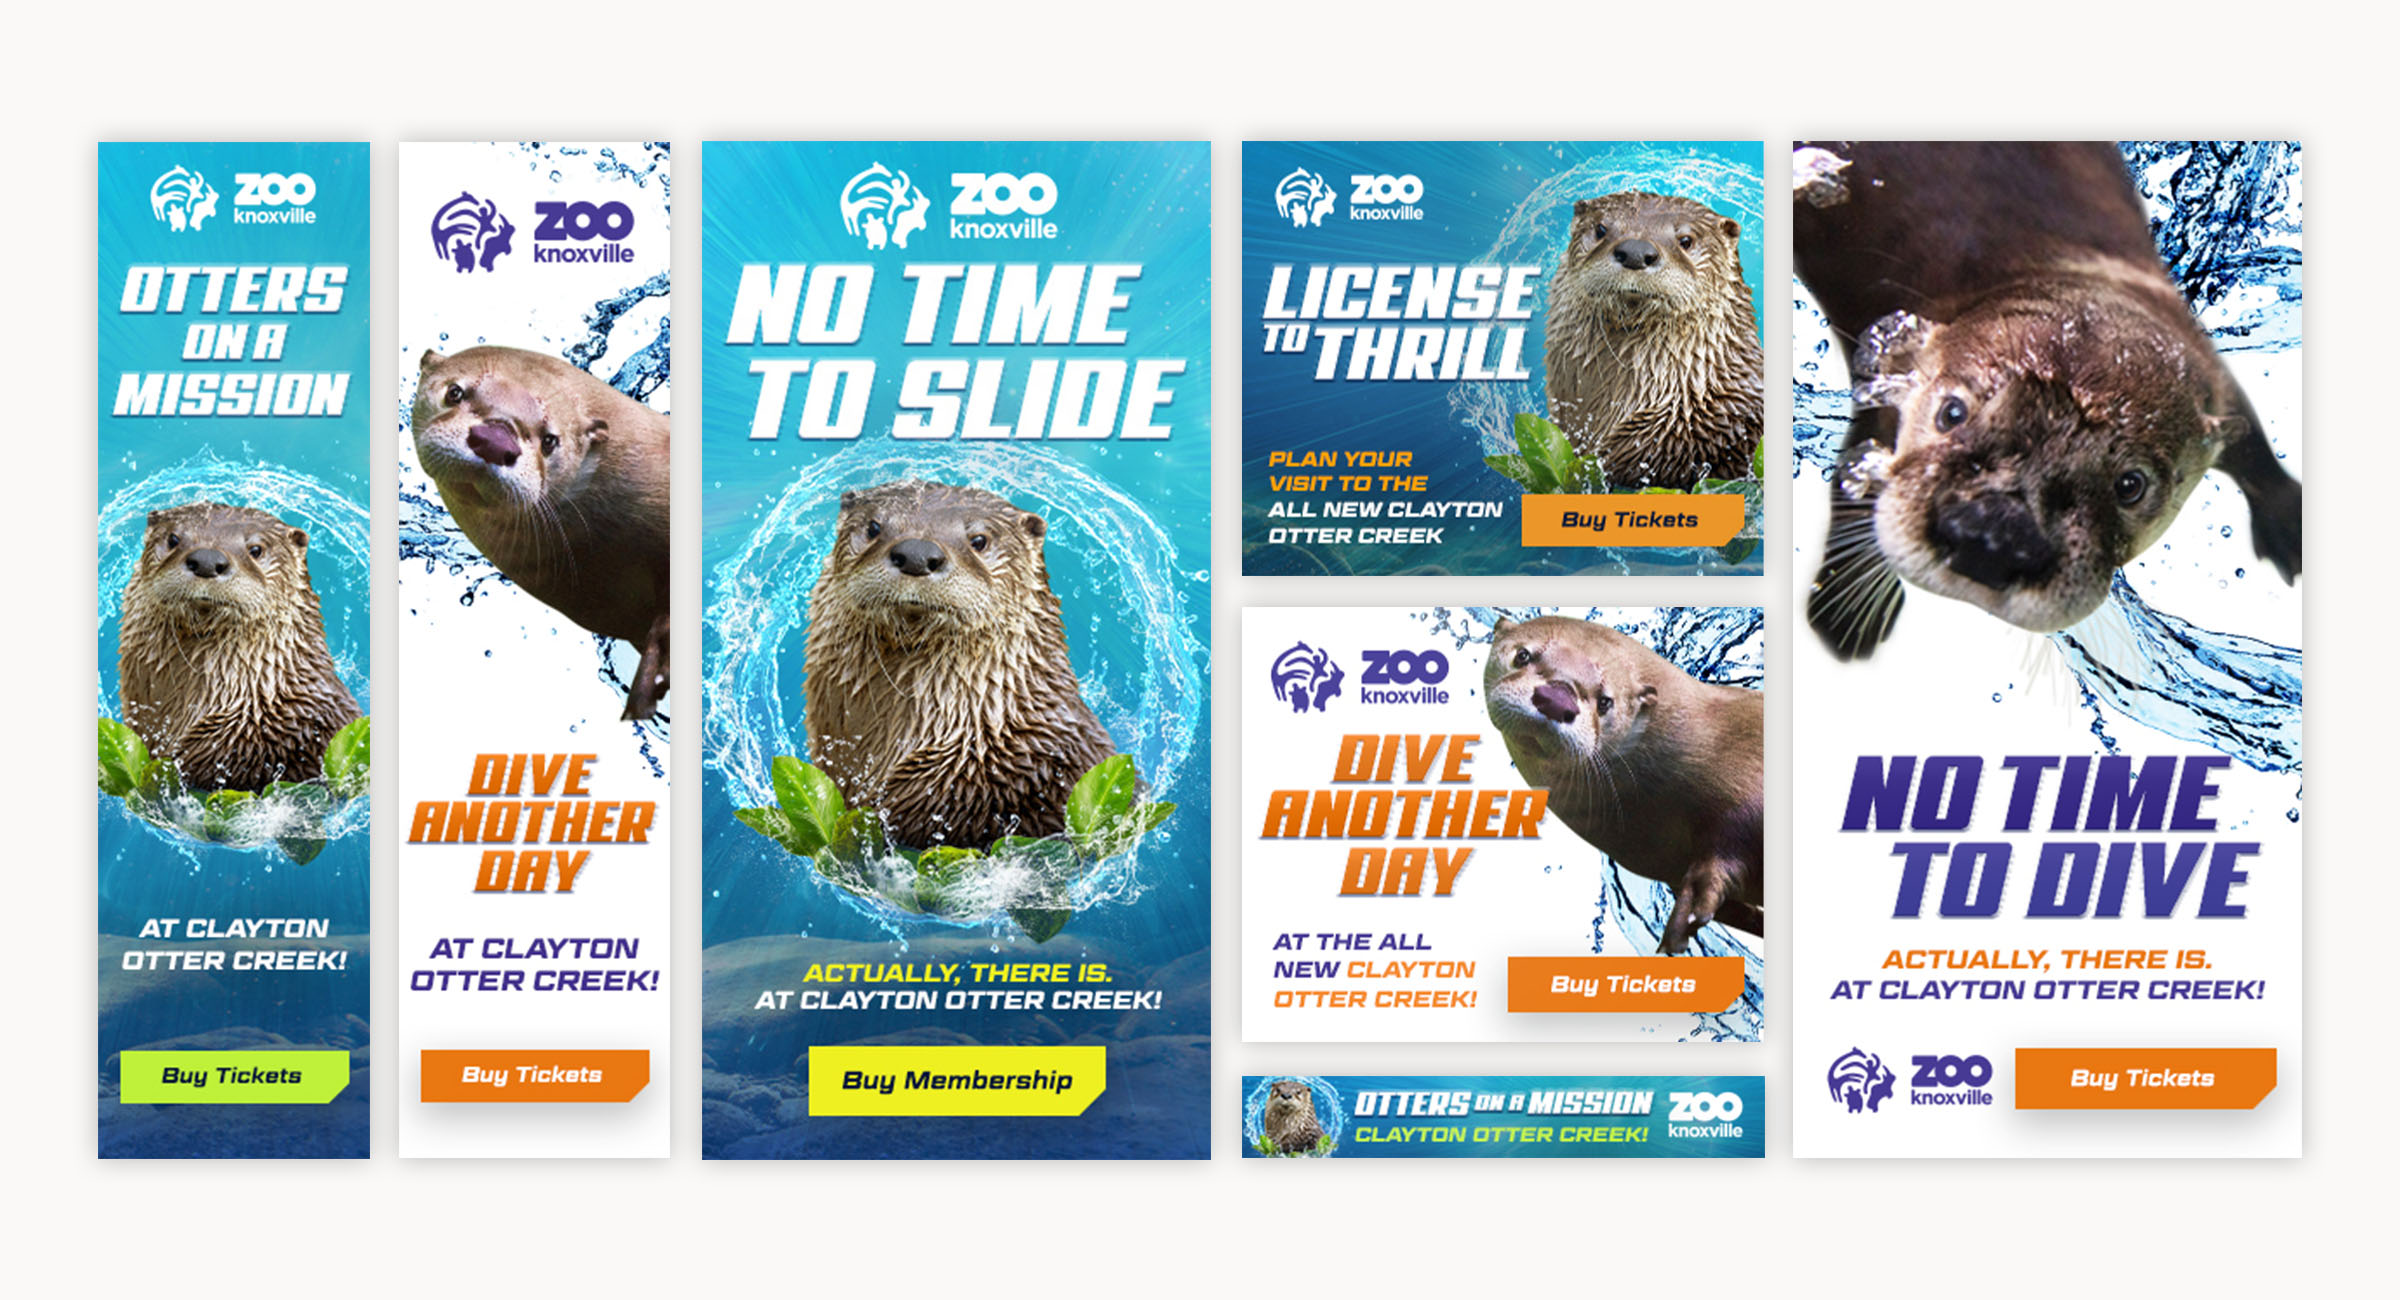 otters on a mission ads collage